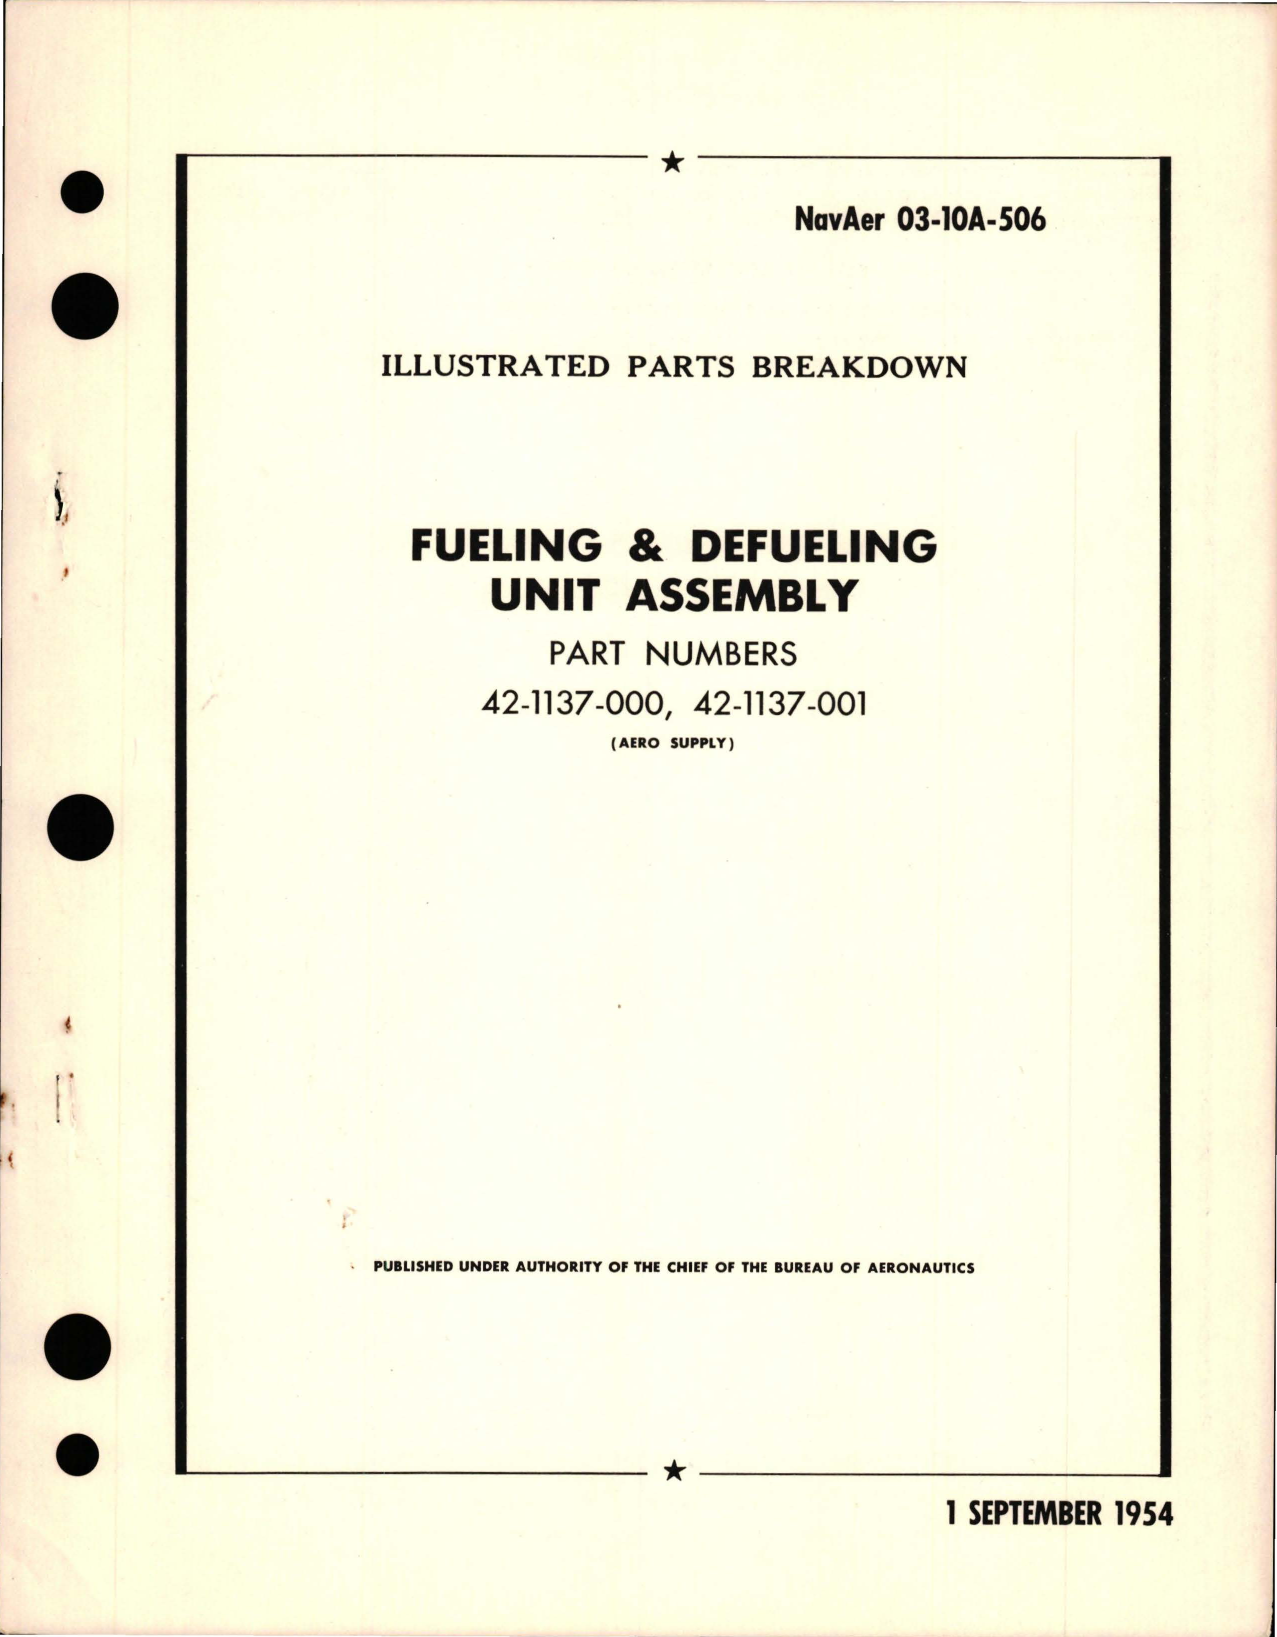 Sample page 1 from AirCorps Library document: Illustrated Parts Breakdown for Fueling and Defueling Unit Assembly - Parts 42-1137-000 and 42-1137-001